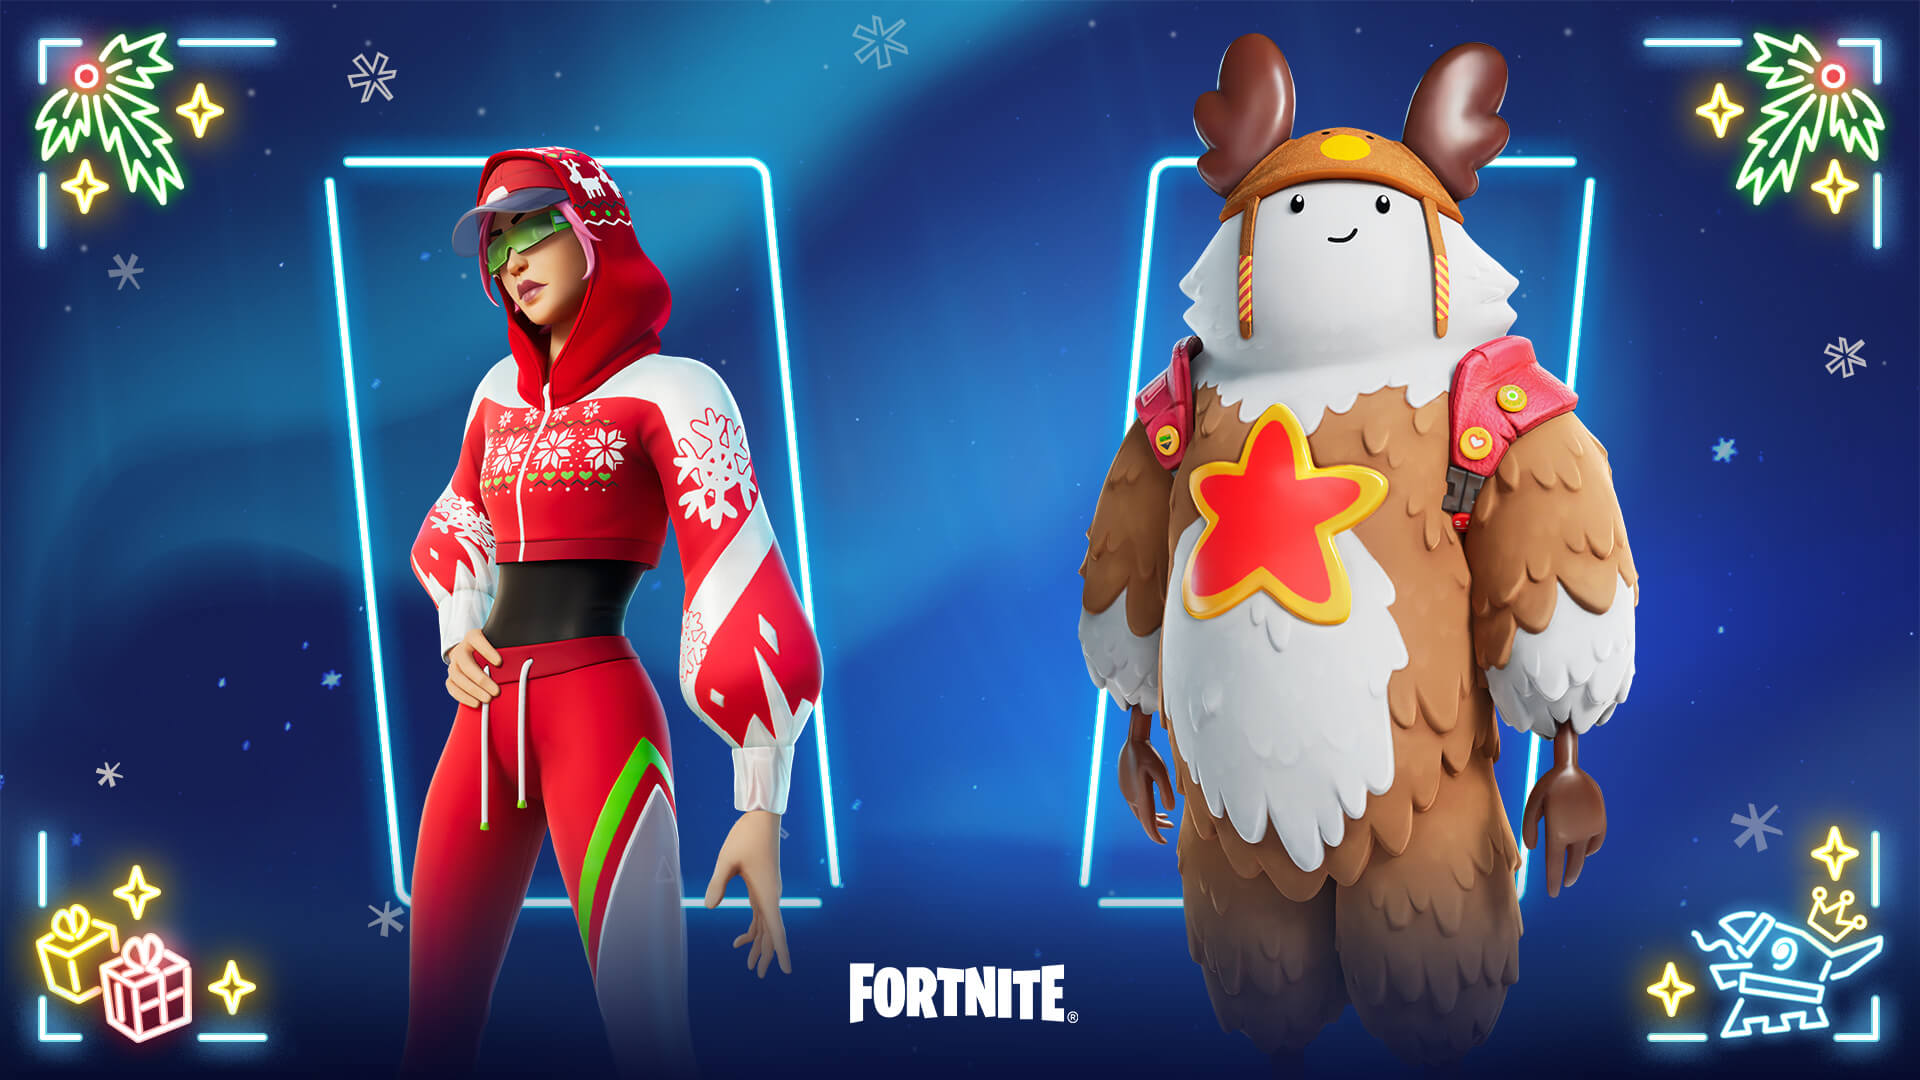 Fortnite Winterfest 2022: Epic Games brings free in-game items, Festive Tools, and More